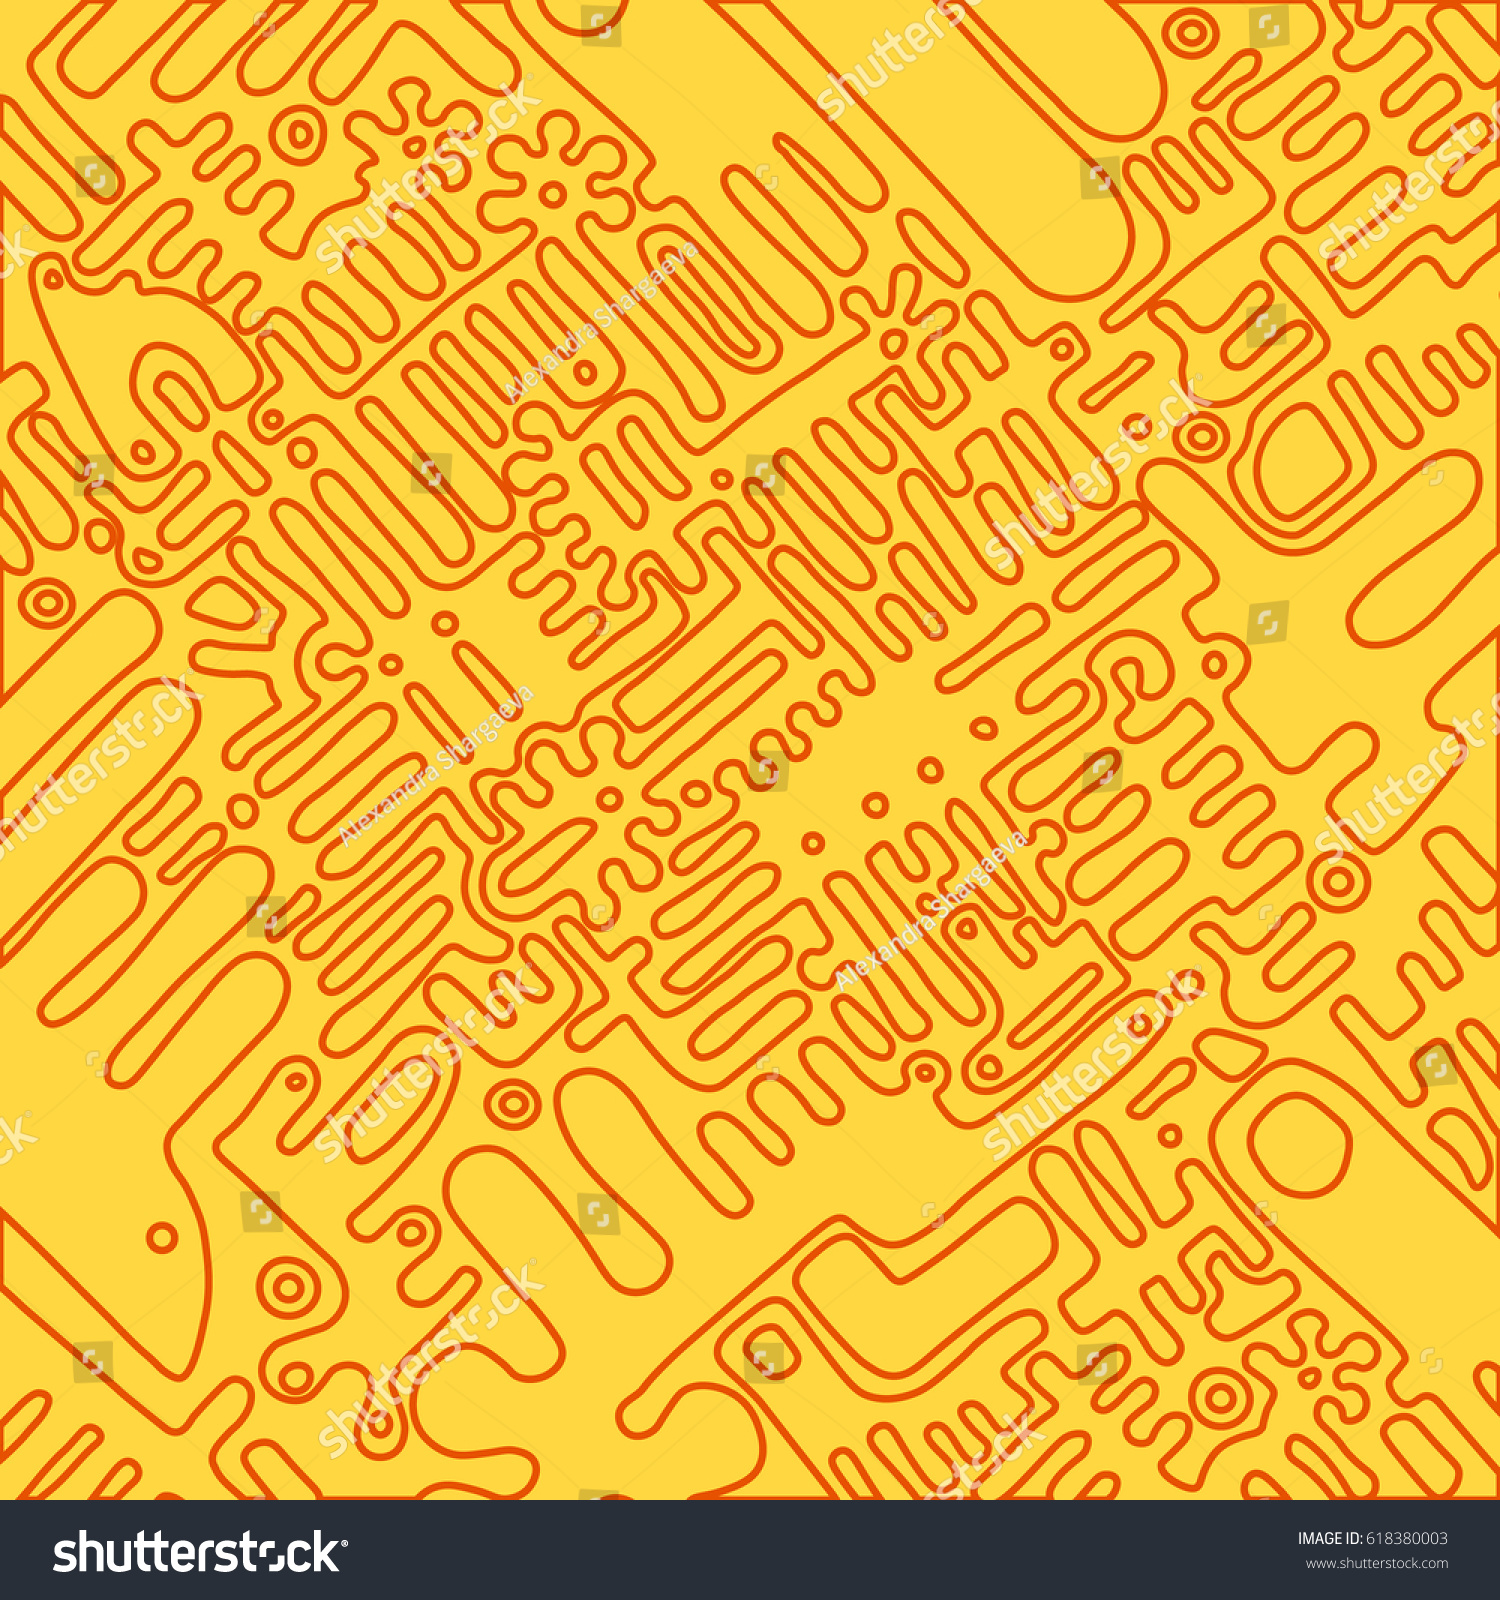 Vector Illustration Sketch Old Electronic Circuit Stock Vector ...